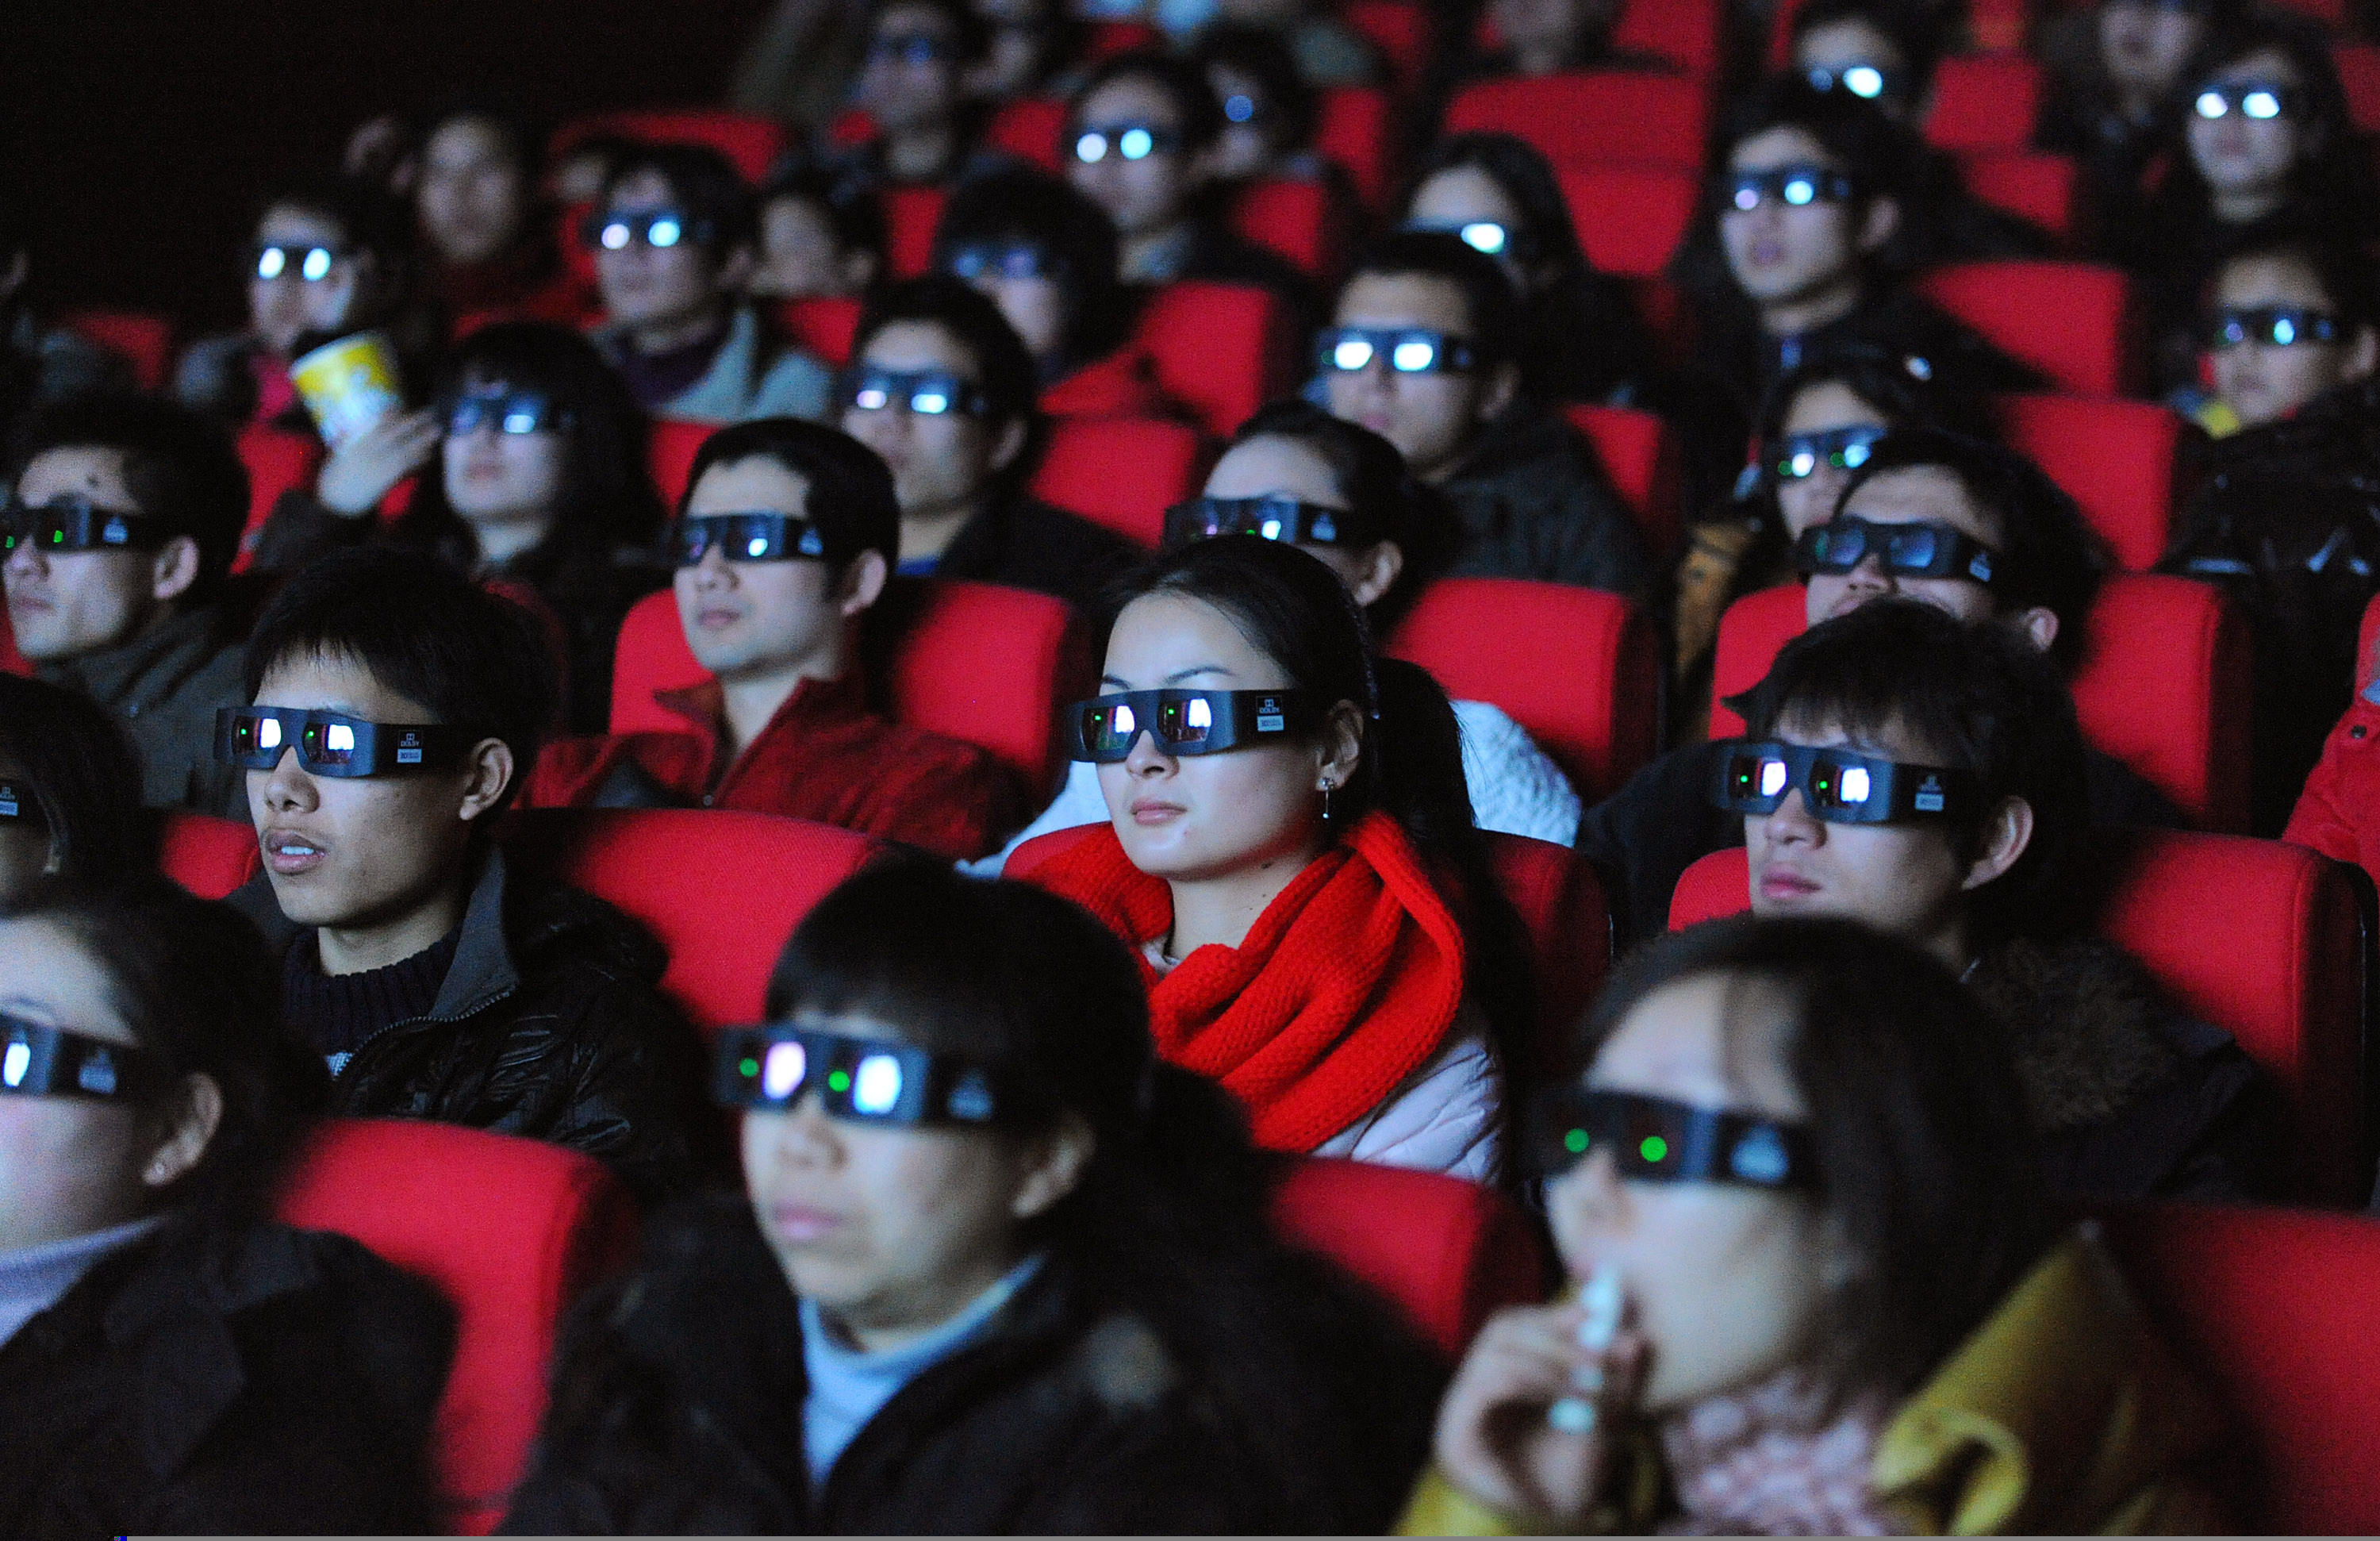 In the first quarter, IMAX enjoyed its highest ever global box office revenues, fuelled by Chinese theatregoers during the Lunar New Year holiday. Photo: AFP